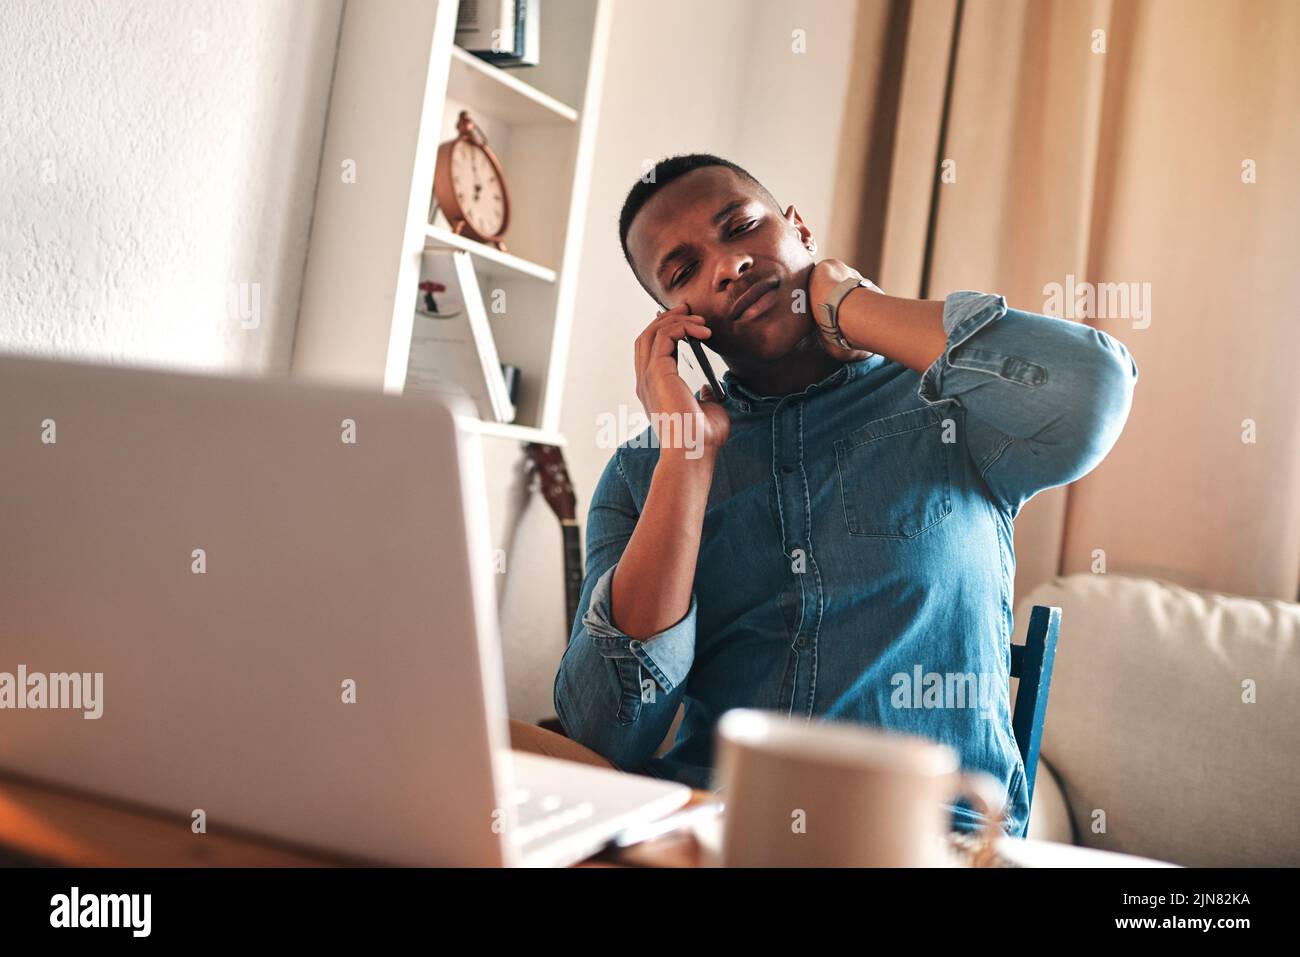 Headache, stress and pain while talking on a phone call and working from a laptop at home. Worried, anxious man rushing to meet a deadline, looking Stock Photo